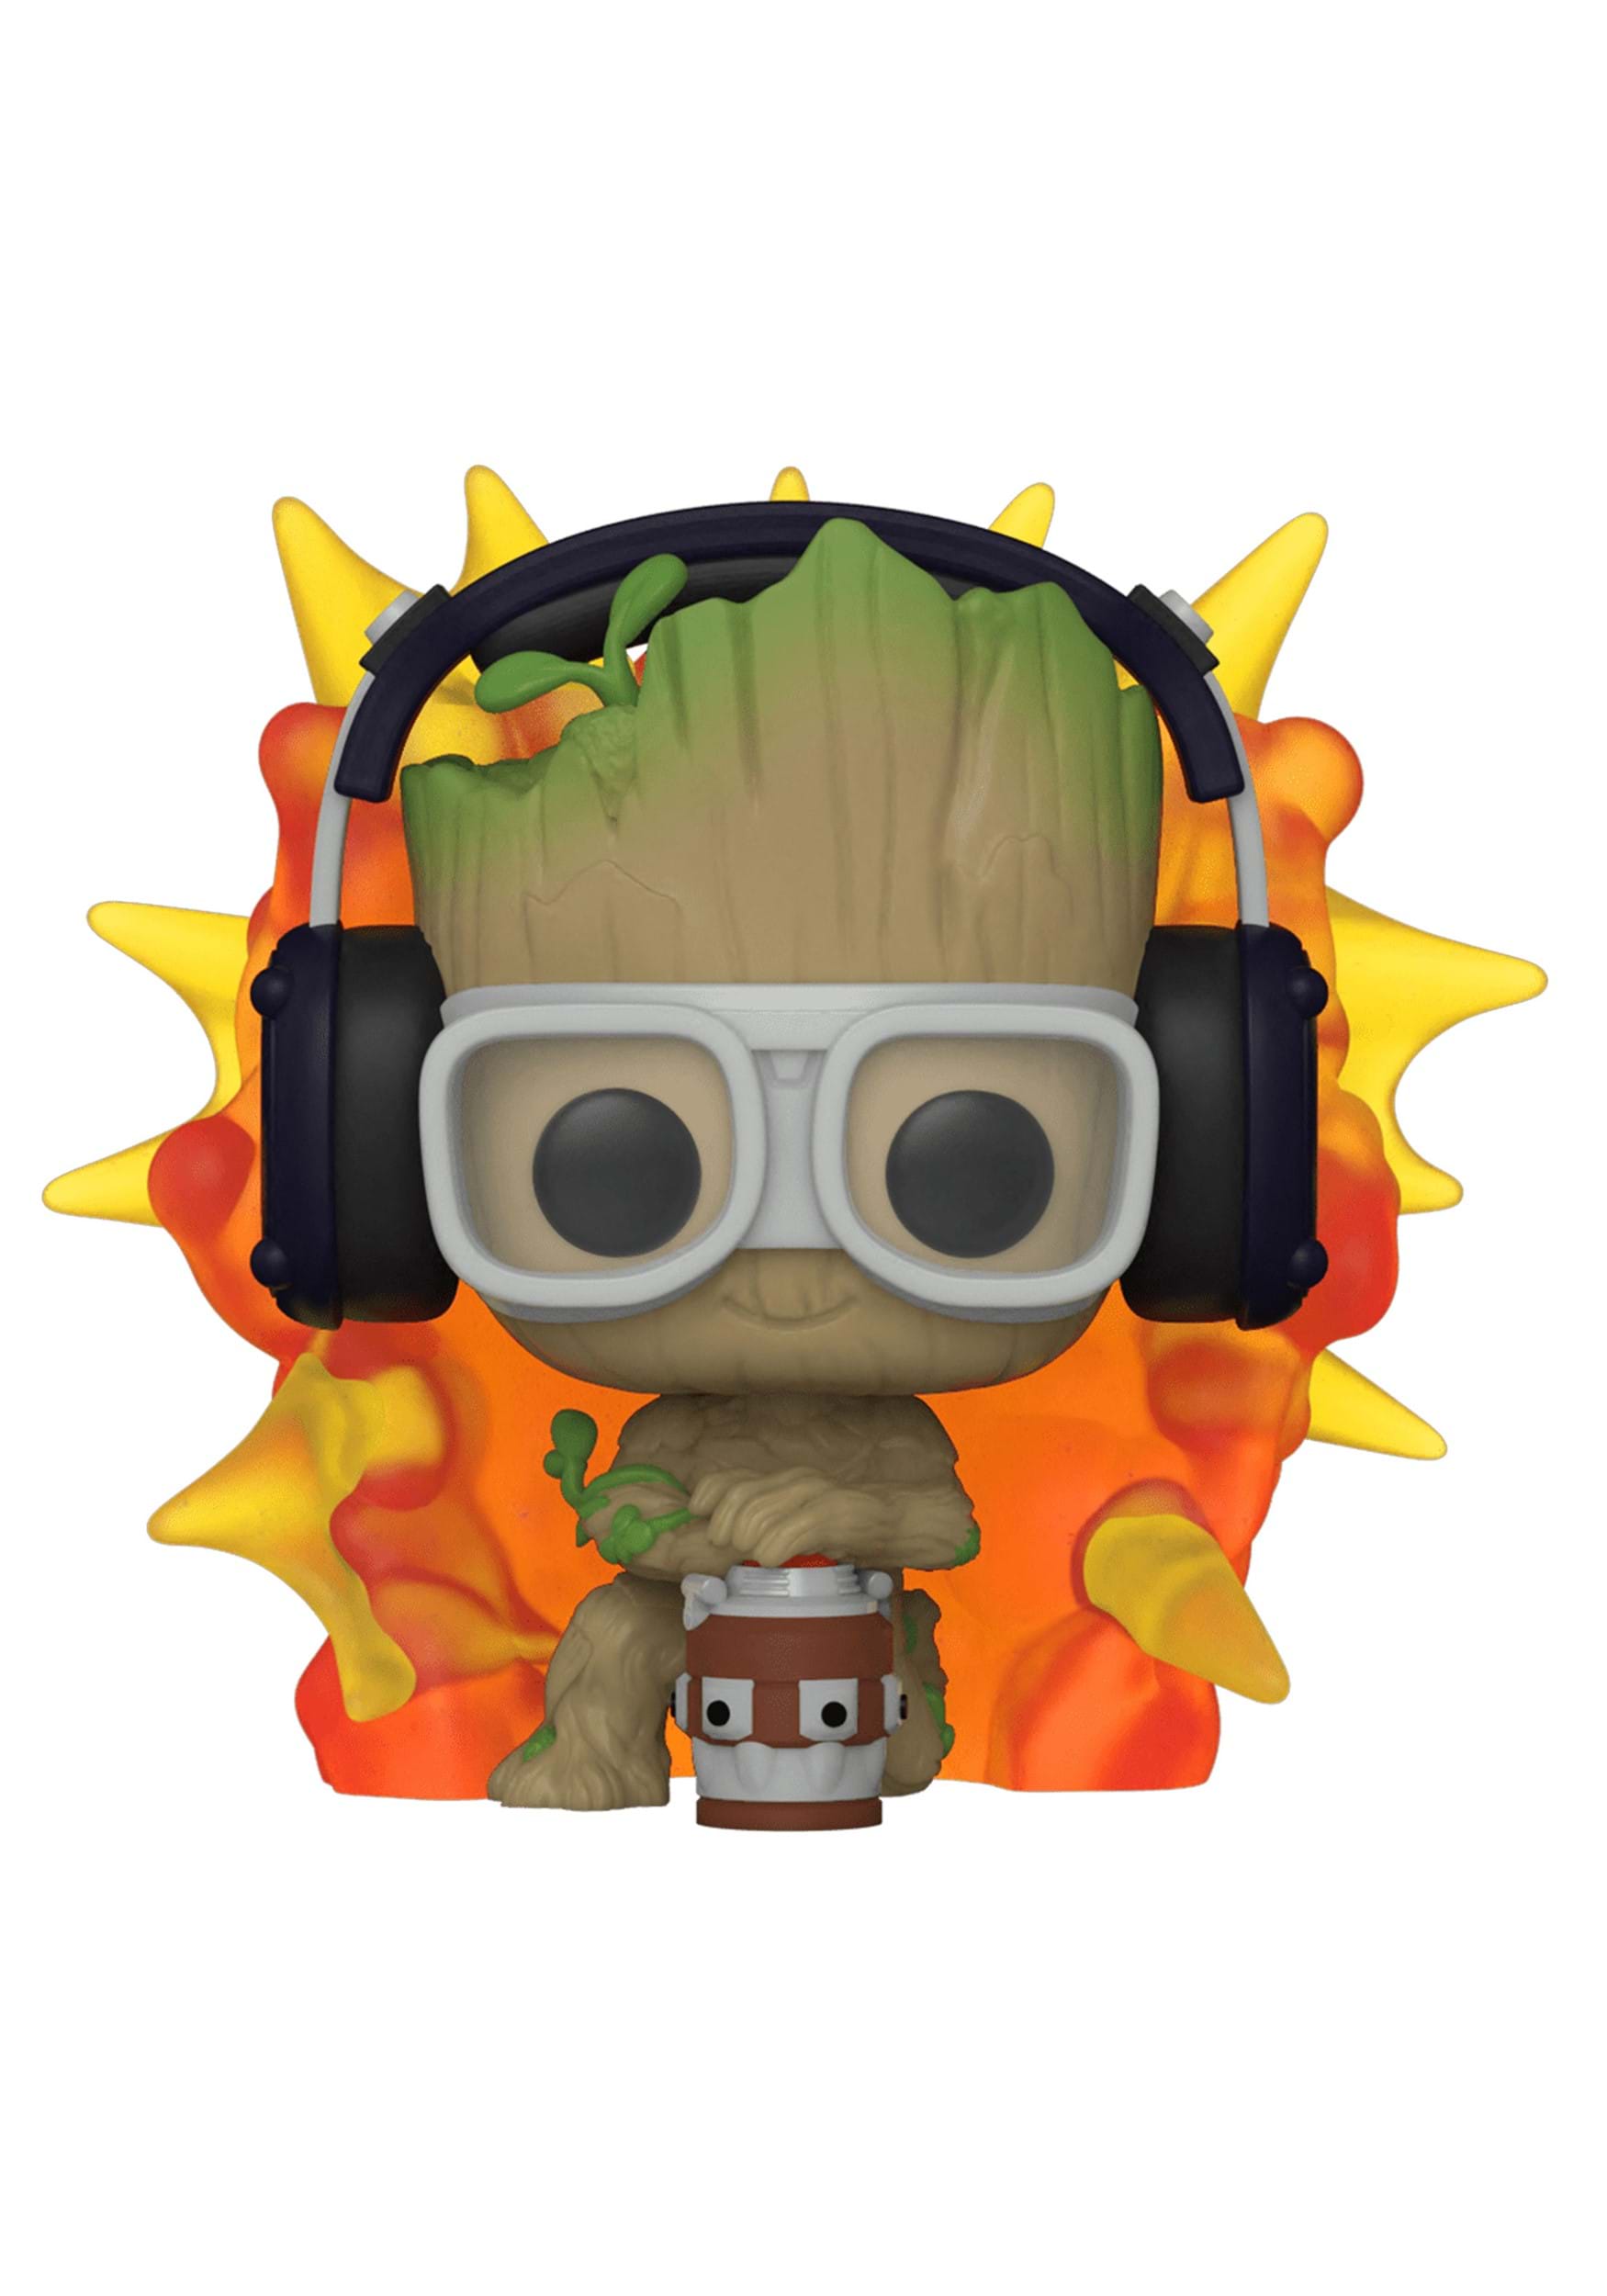 https://images.fun.com/products/91141/1-1/pop-marvel-i-am-groot-groot-with-detonator.jpg